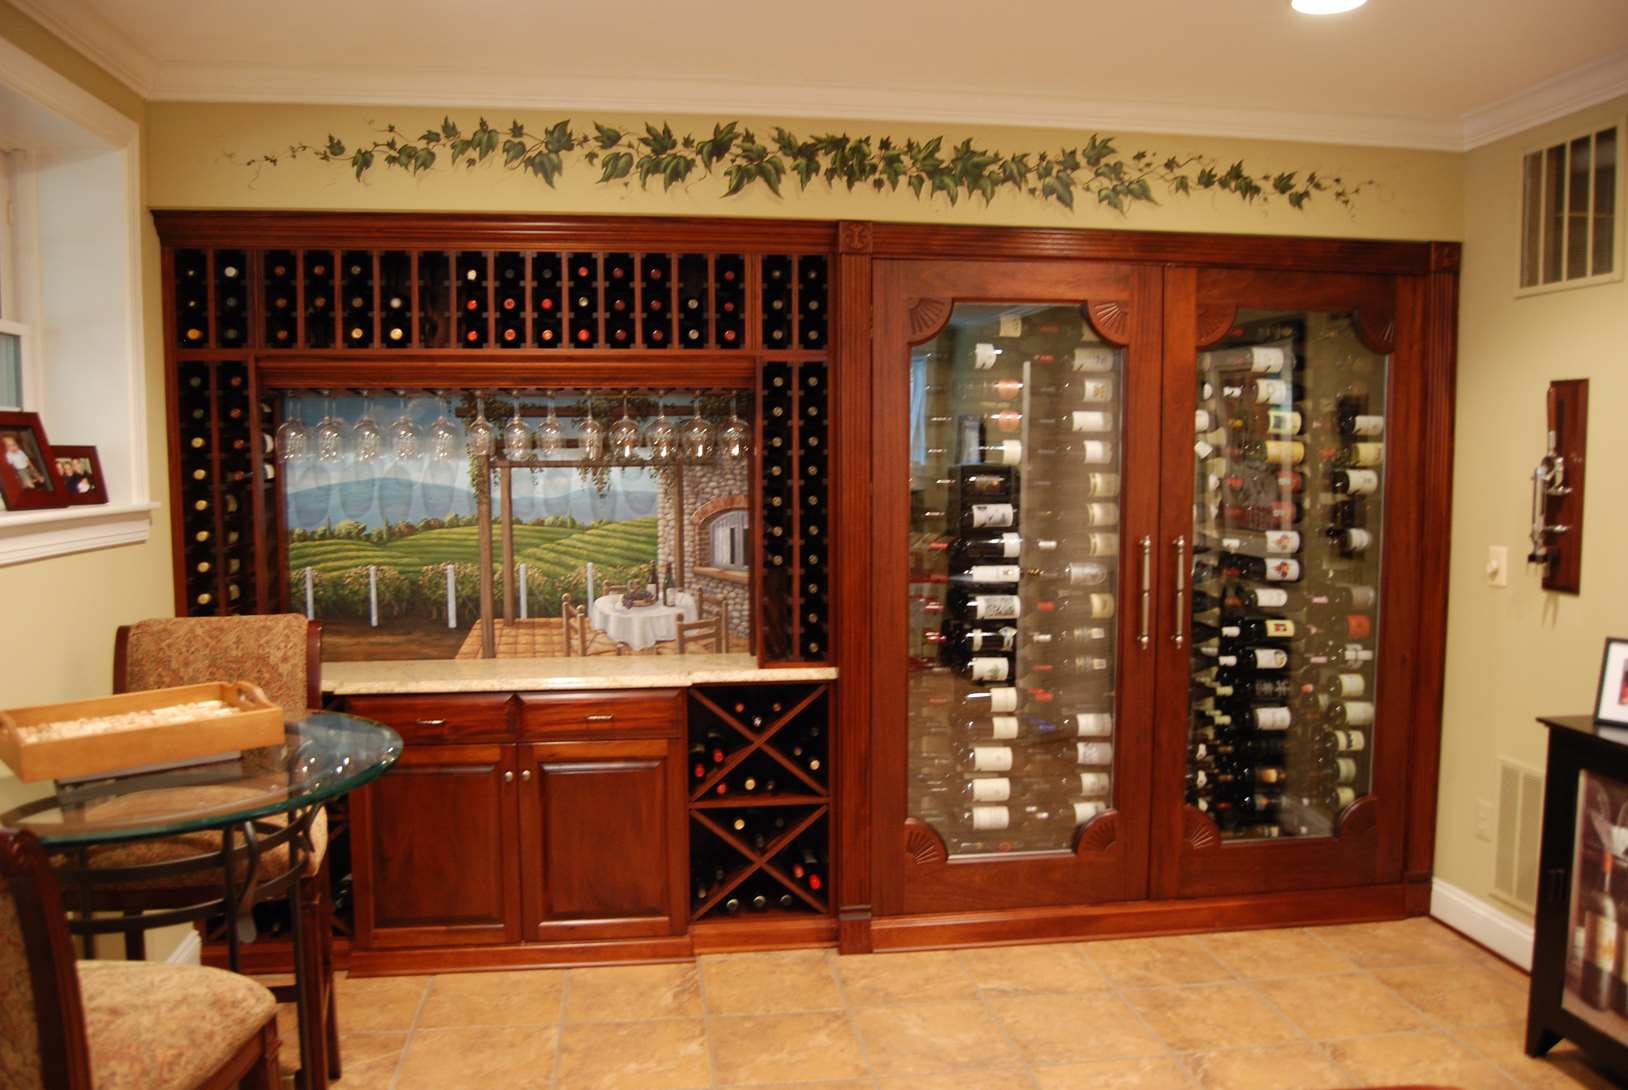 Wine Cellar Wall Window And Vines Mural 4